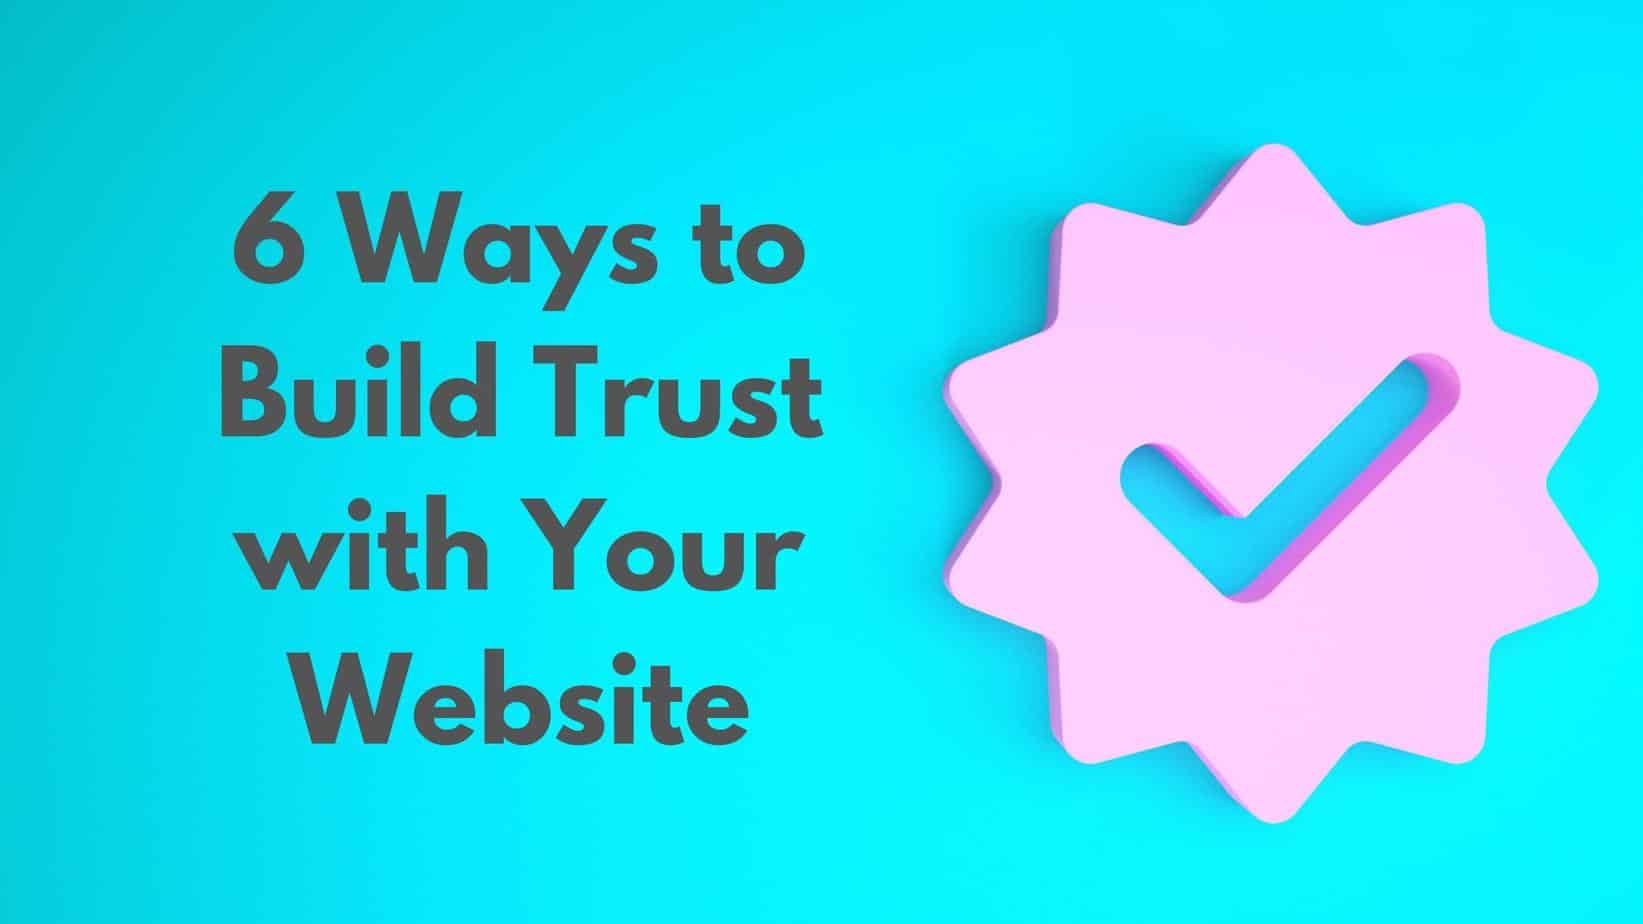 Featured image for “6 Ways to Build Trust with Your Website”